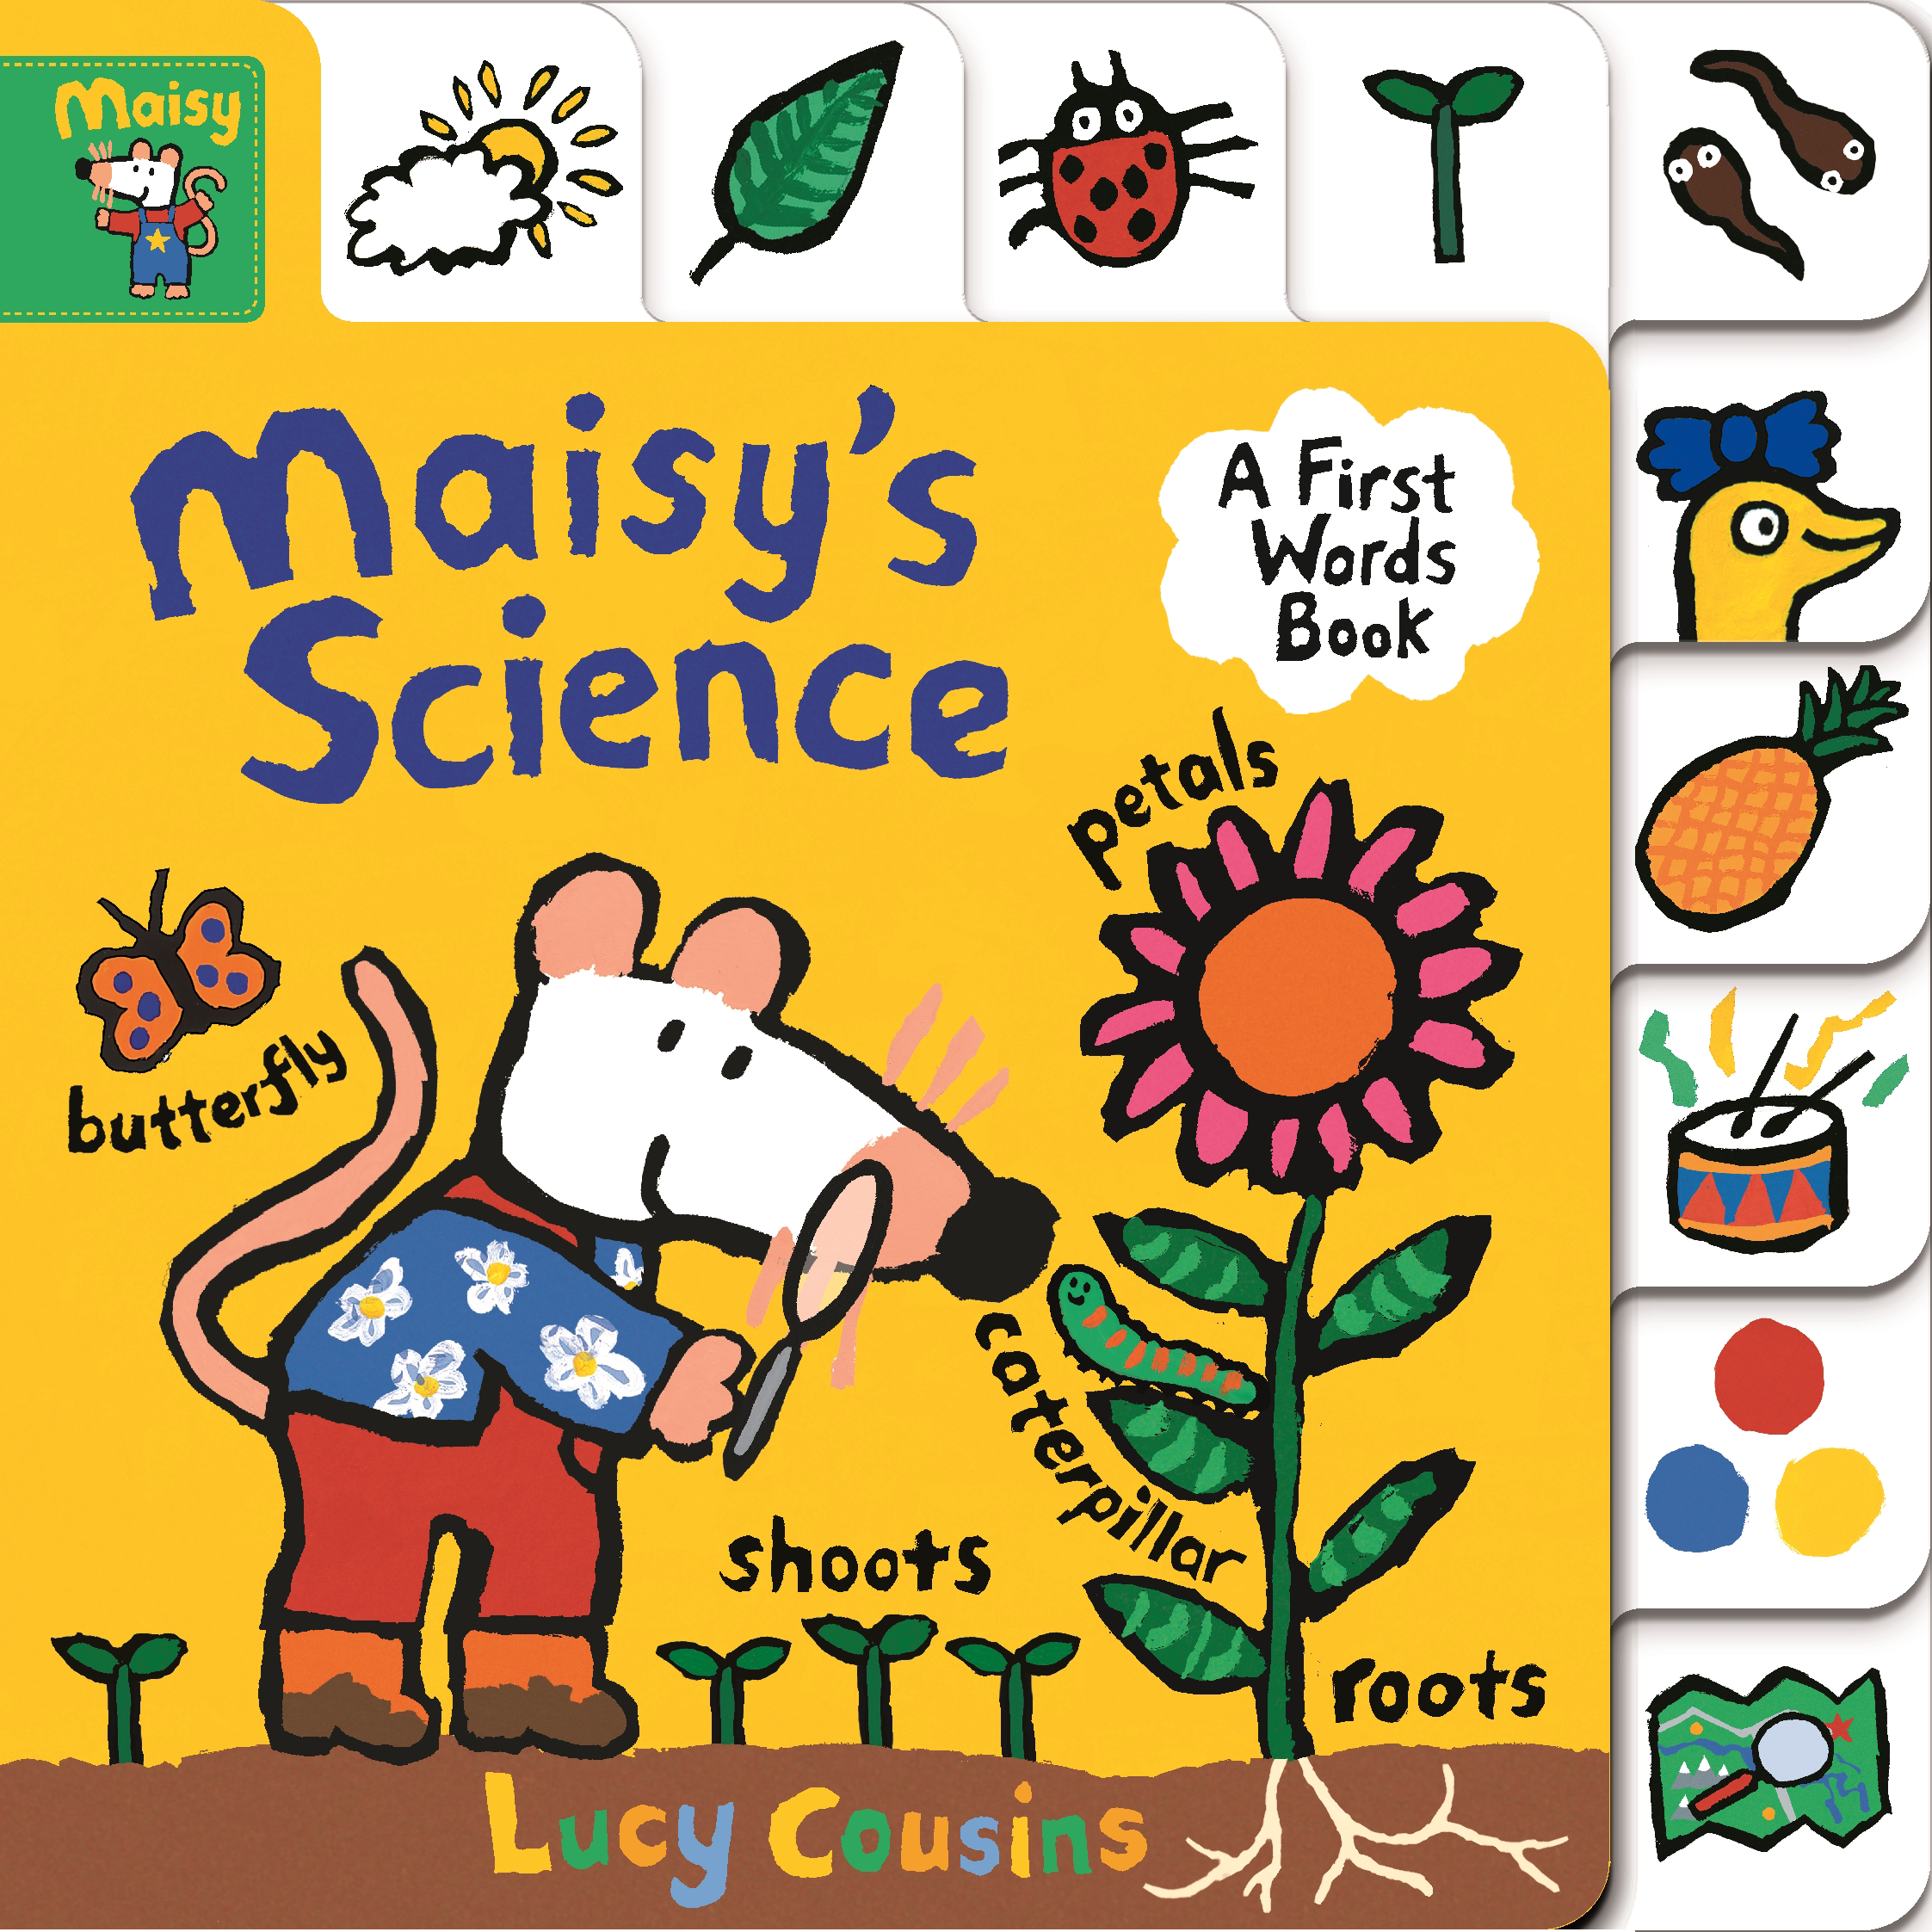 Maisy-s-Science-A-First-Words-Book